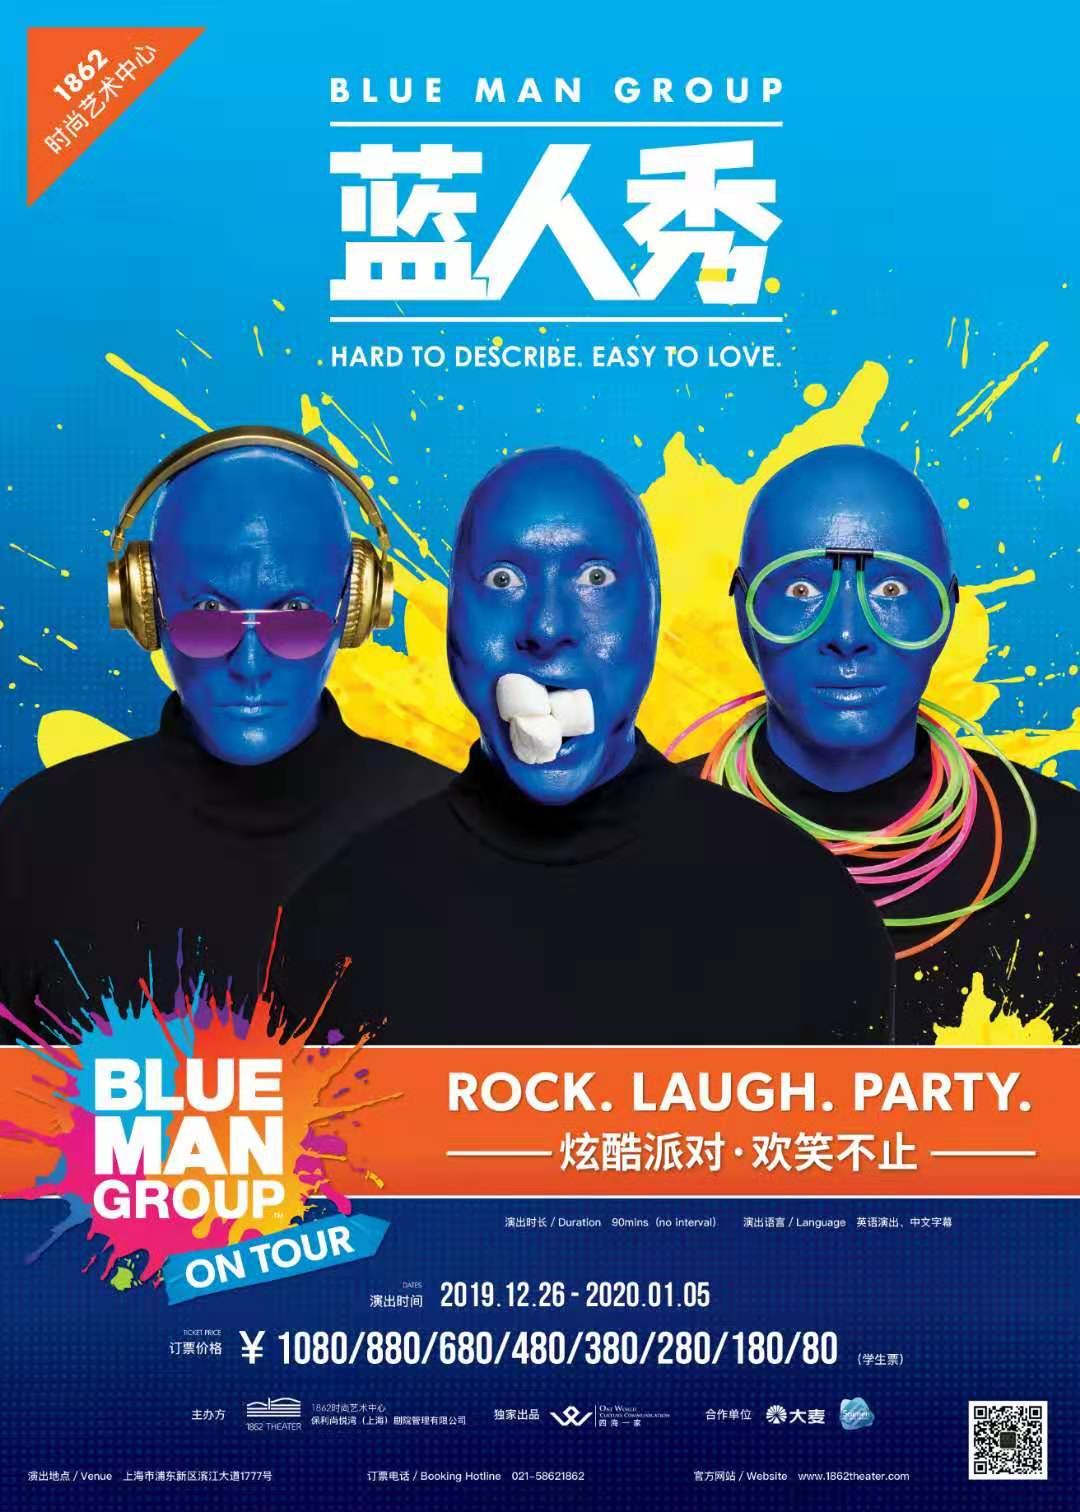 Promotional poster for the Blue Man Group's tour, featuring the iconic blue-faced performers against a vibrant yellow and black splash background